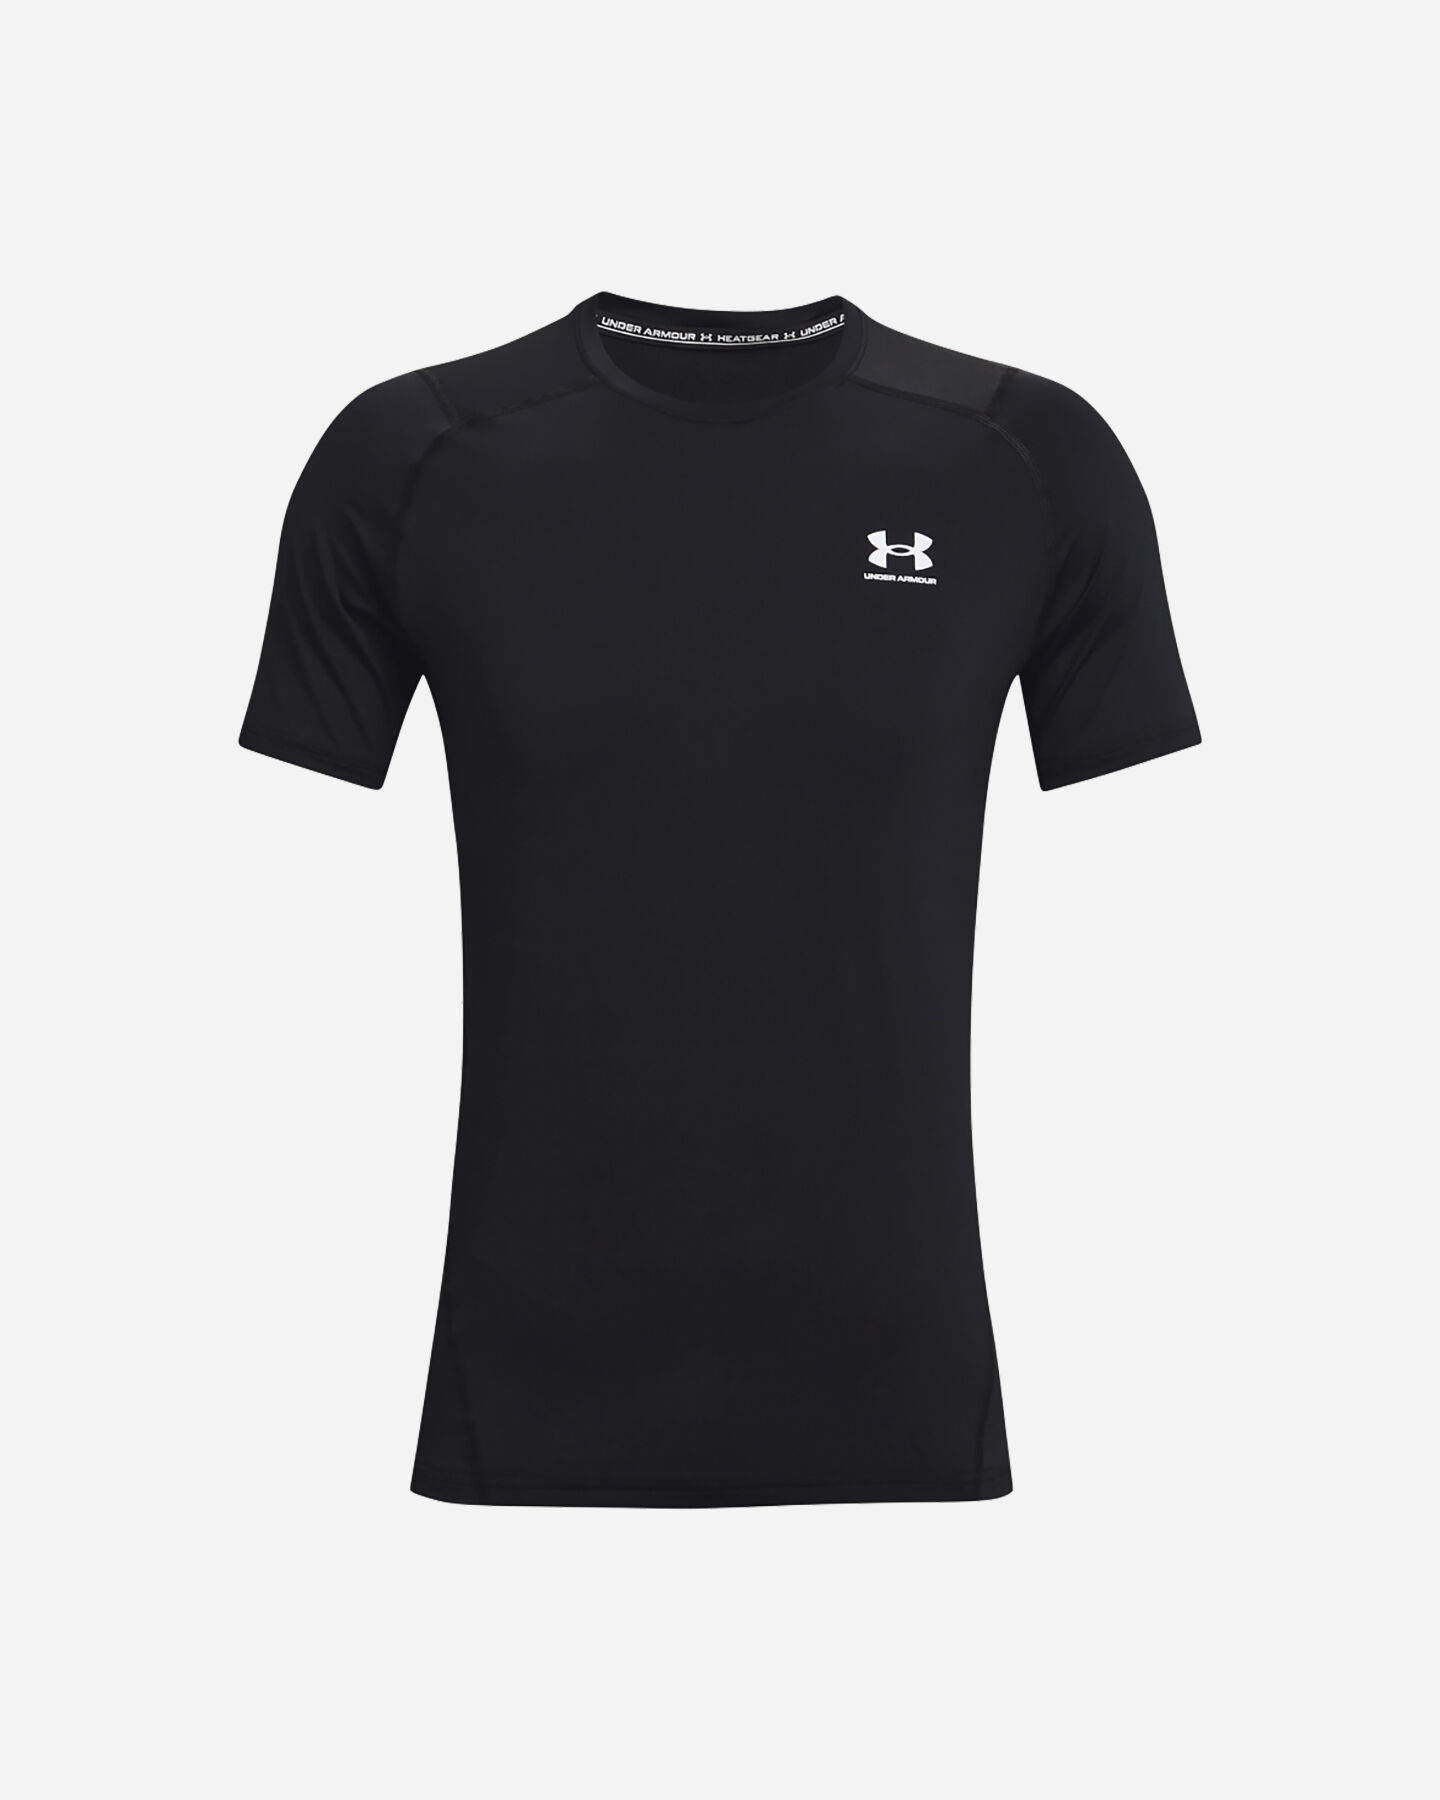  T-Shirt training UNDER ARMOUR HEAT GEAR M S5287412|0001|SM scatto 0